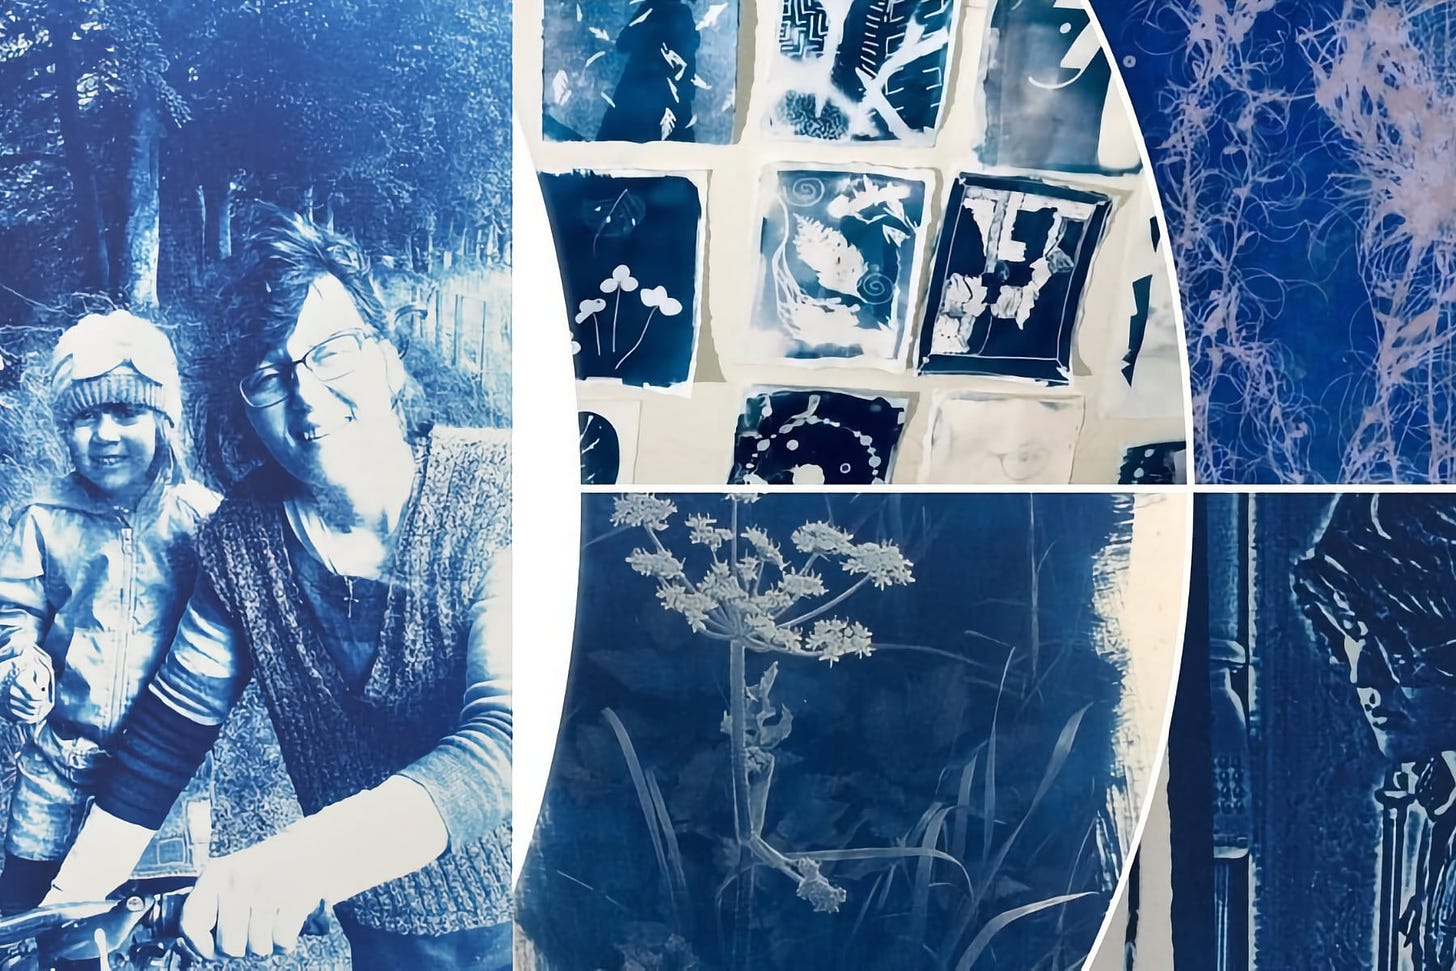 The image is a collage of cyanotype prints with a dominant blue and white colour scheme. On the left, there's a joyful outdoor scene featuring an adult and a young child, both smiling widely beside a bicycle. On the right, there are various smaller cyanotype prints showcasing different botanical shapes and abstract designs. The lower right features a detailed print of a plant, capturing the fine details of its leaves and flowers. Cyanotype is a photographic printing process that produces a cyan-blue print, and these artworks exemplify the technique's distinctive hue and shadow detail.